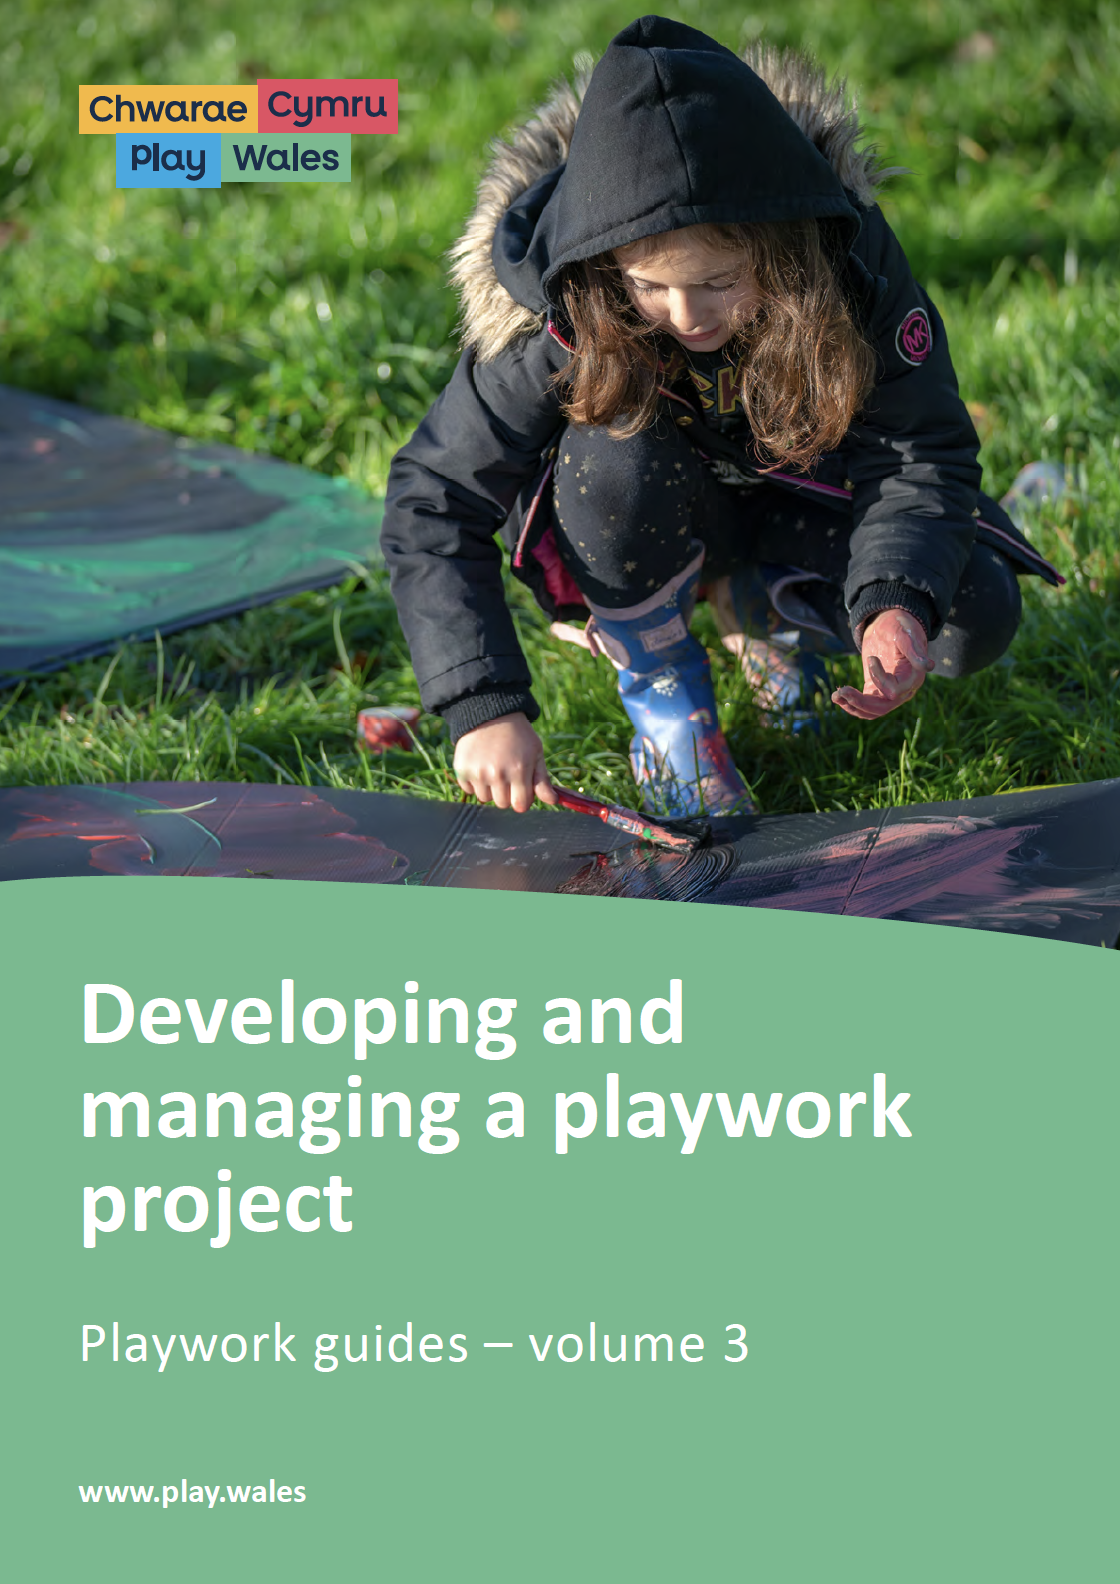 Developing and managing a playwork project